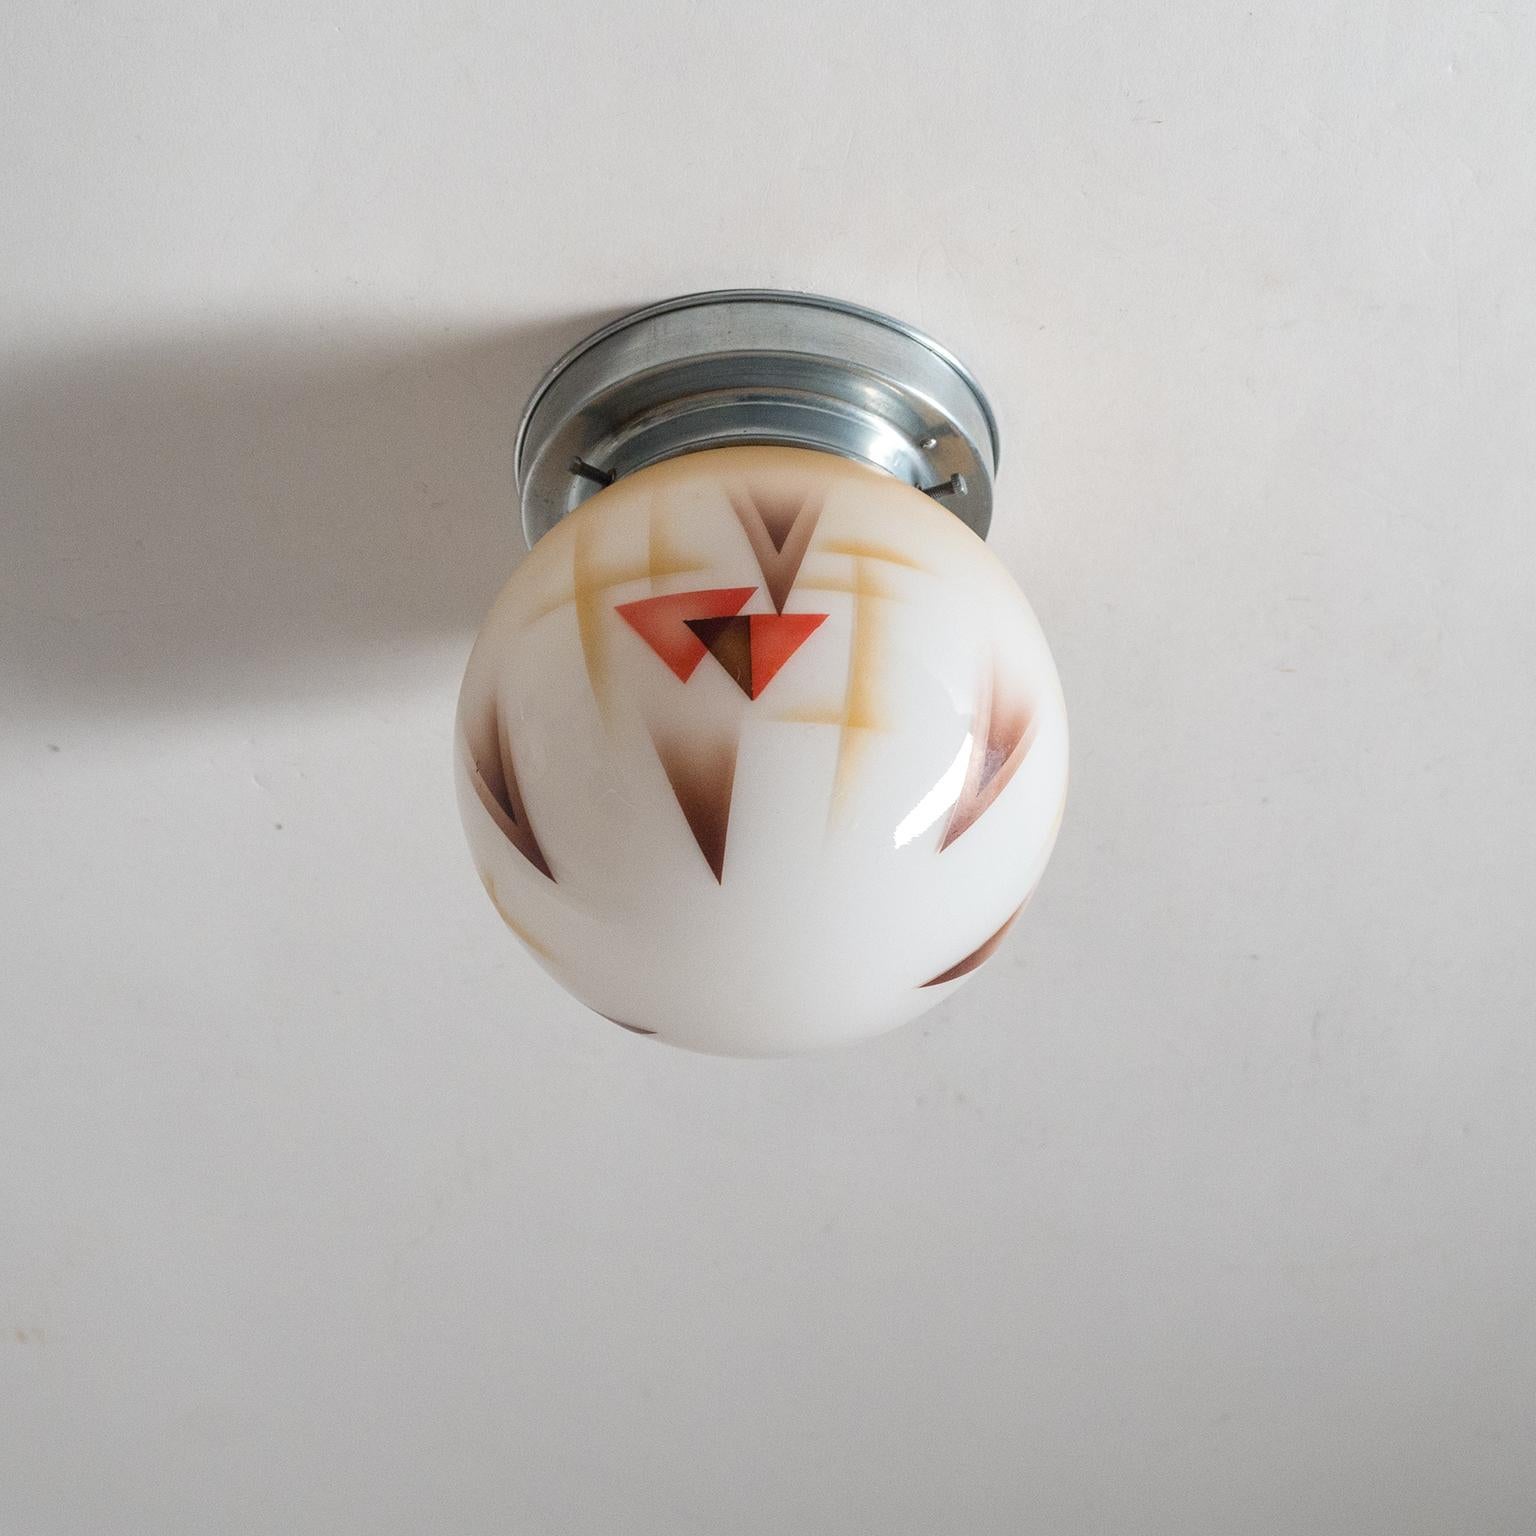 Pair of Art Deco Ceiling or Wall Lights, circa 1930, Enameled Glass 2